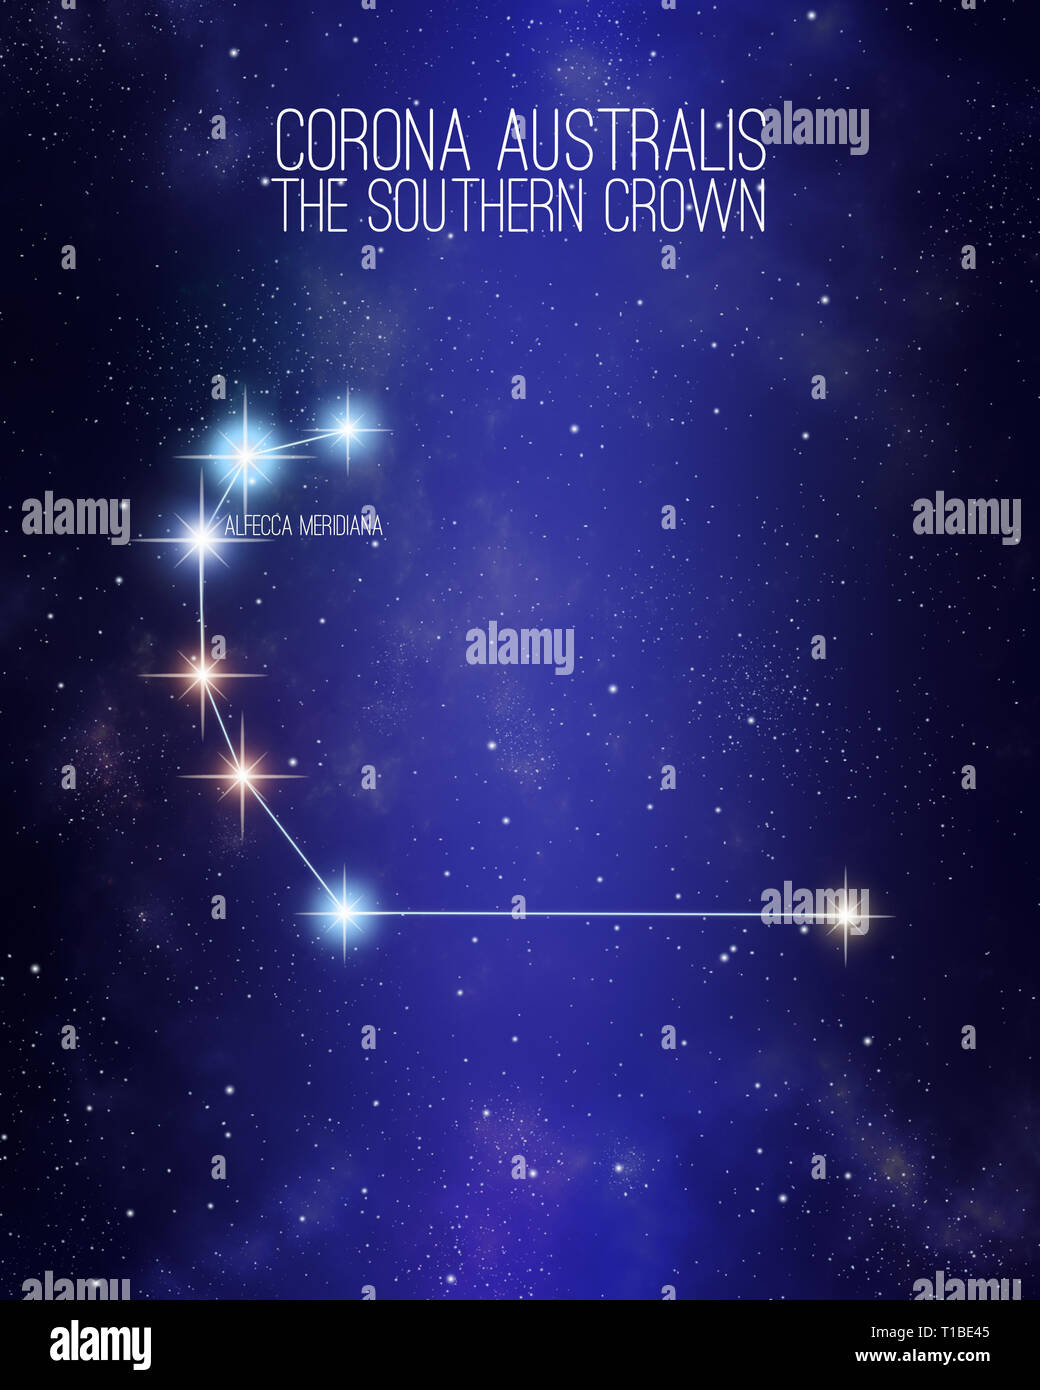 Corona australis the southern crown constellation on a starry space background with the names of its main stars. Relative sizes and different color sh Stock Photo